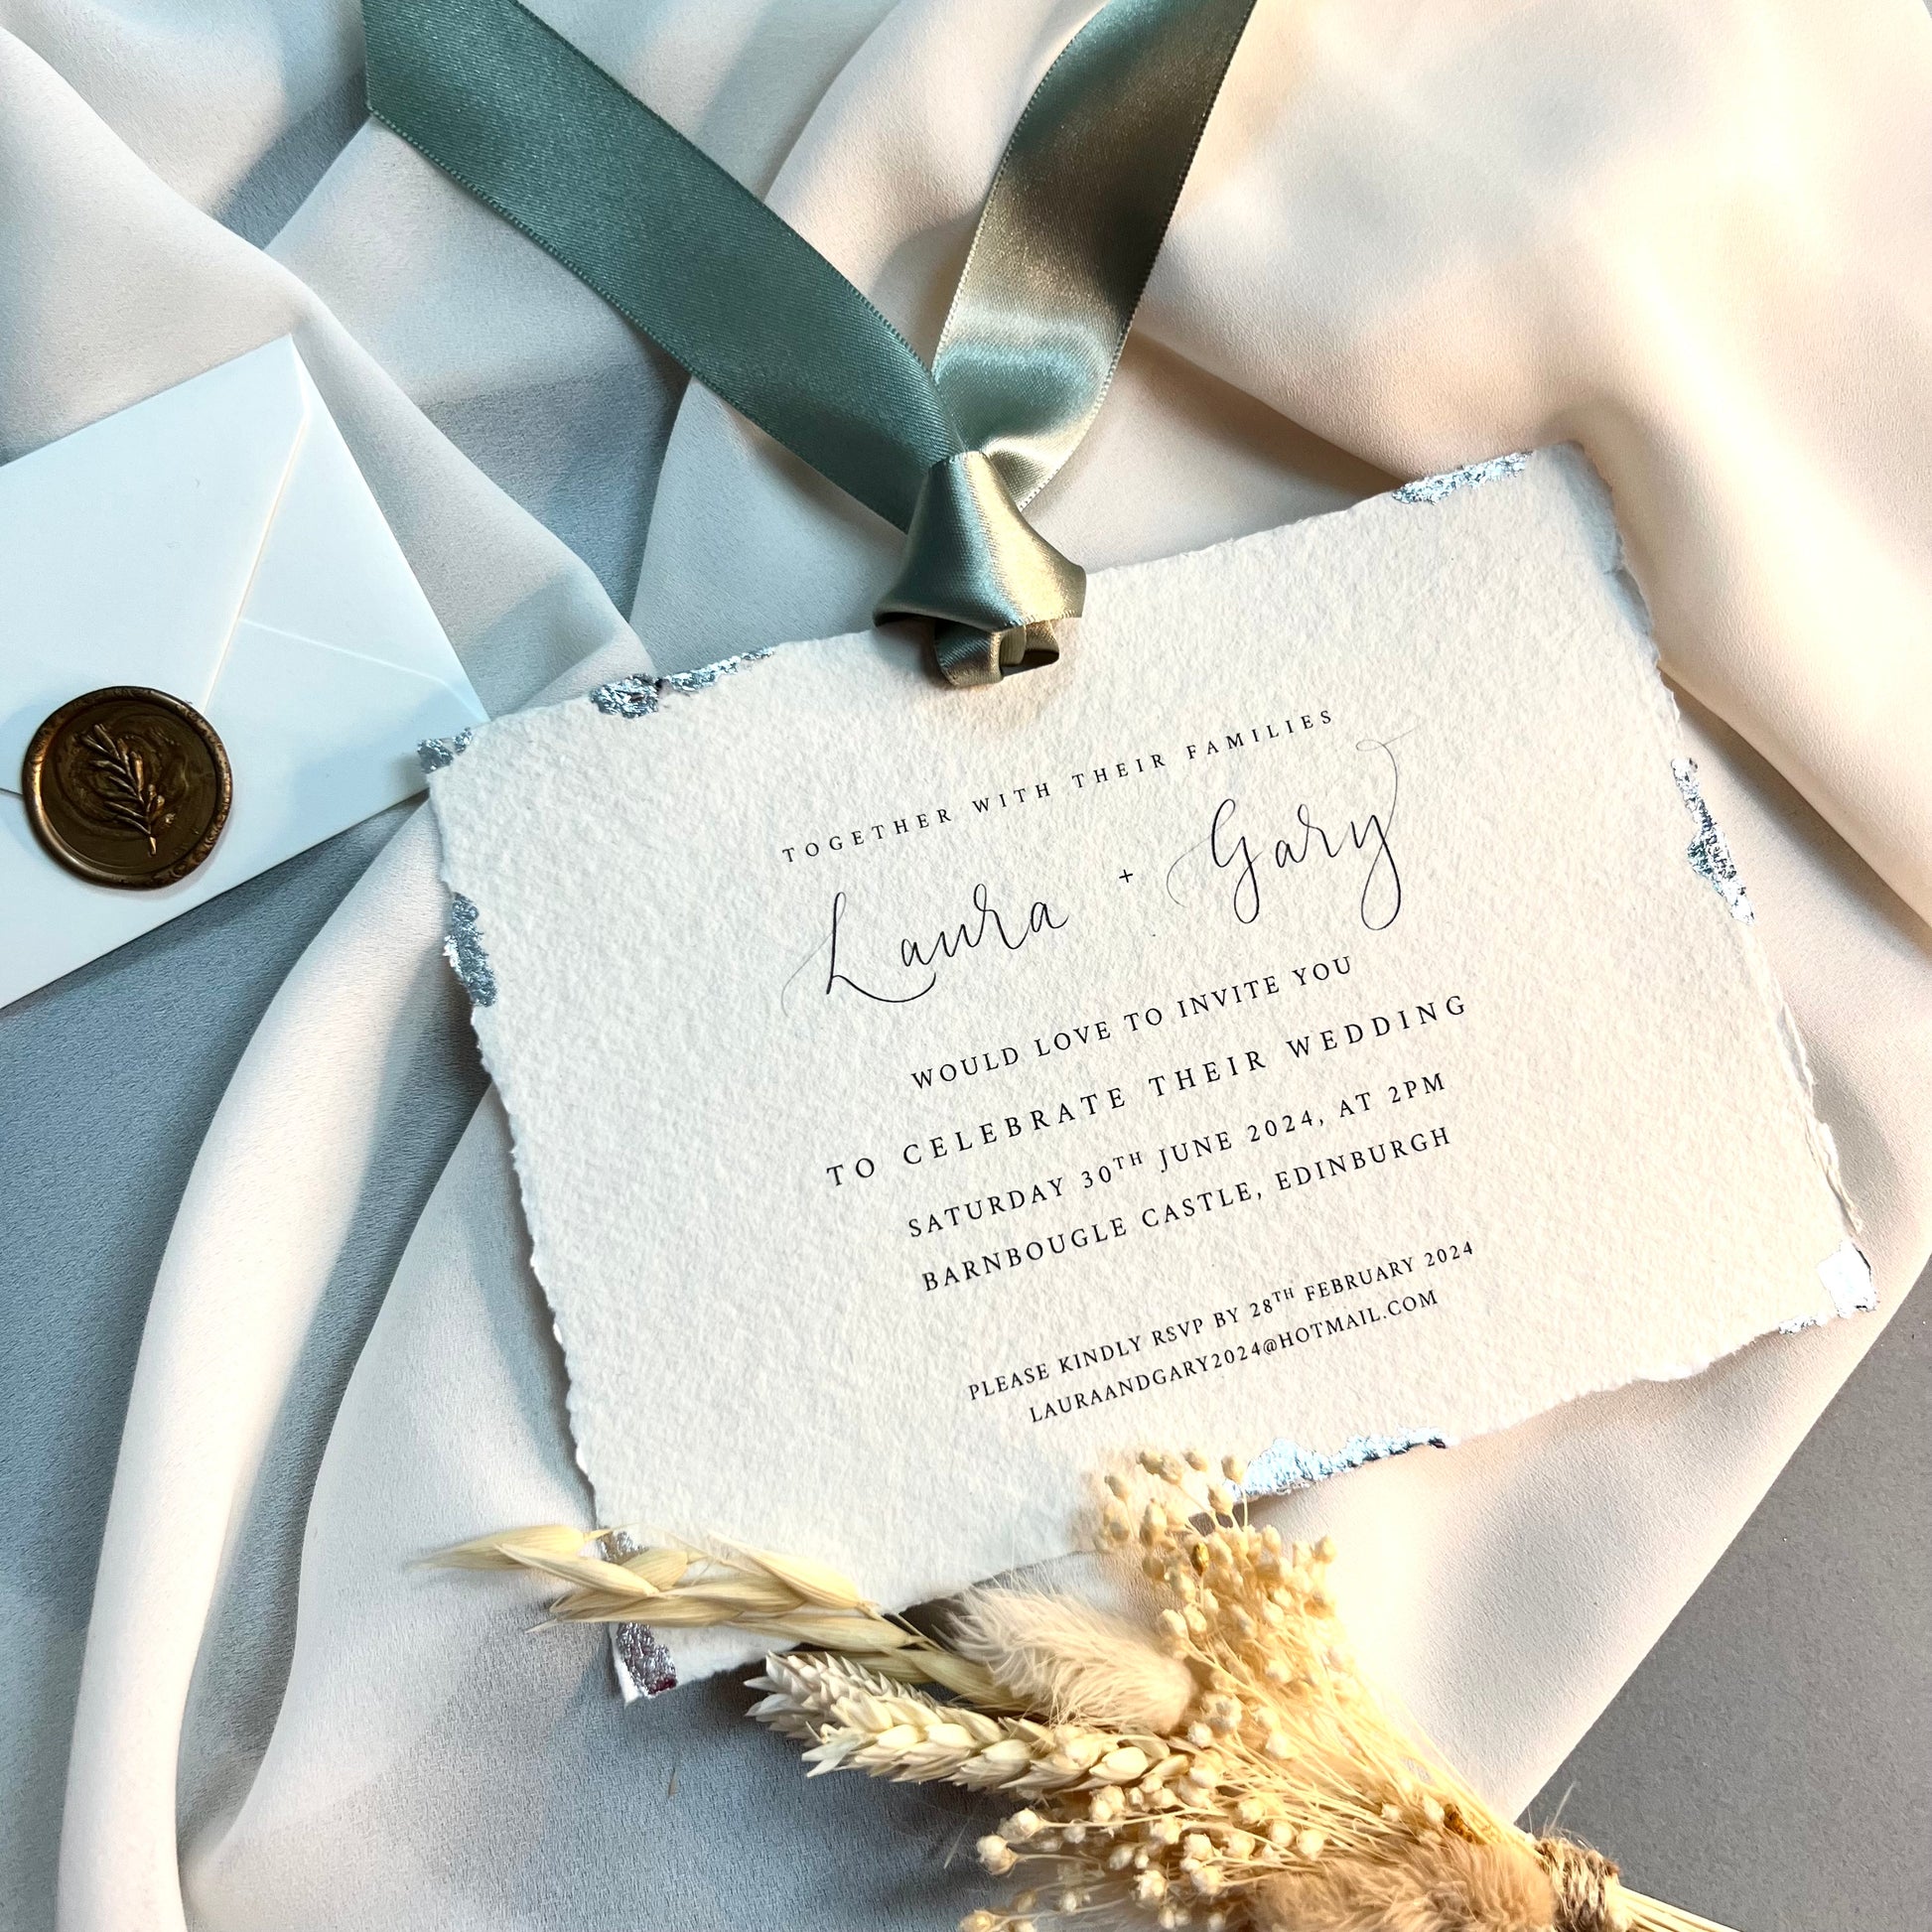 Rough edged paper with silver detail around edges, invitation printed on paper and sage green satin ribbon at top. Invitation on ivory fabric with dried grass and wax sealed envelope